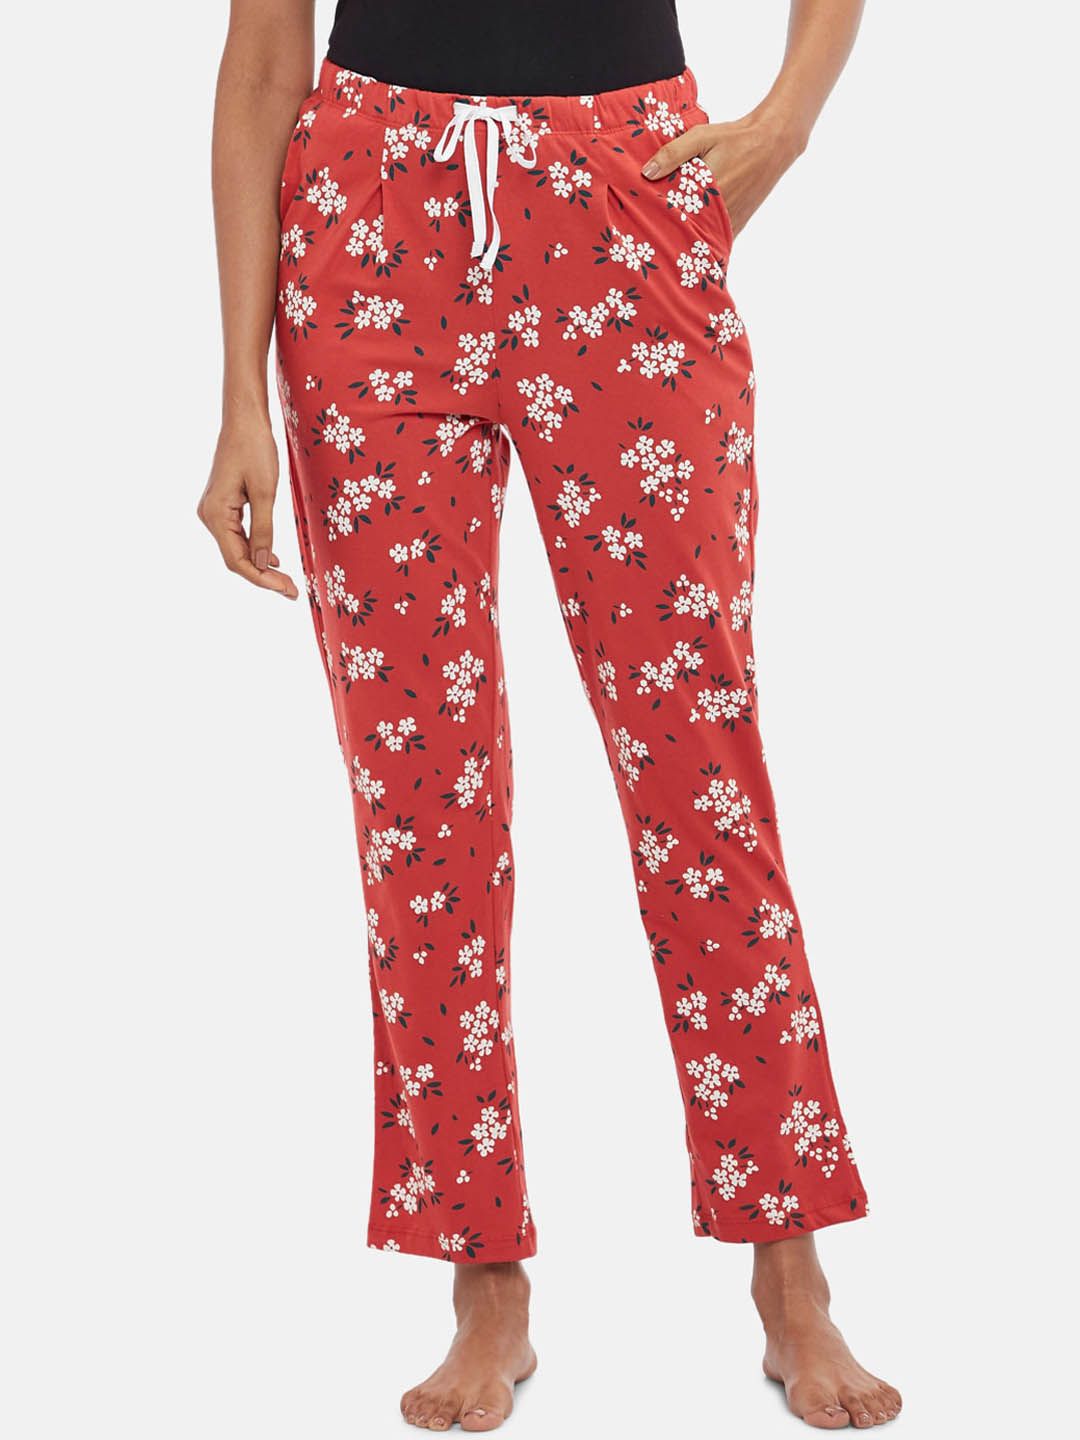 Dreamz by Pantaloons Women Red & White Floral Printed Pure Cotton Lounge Pants Price in India